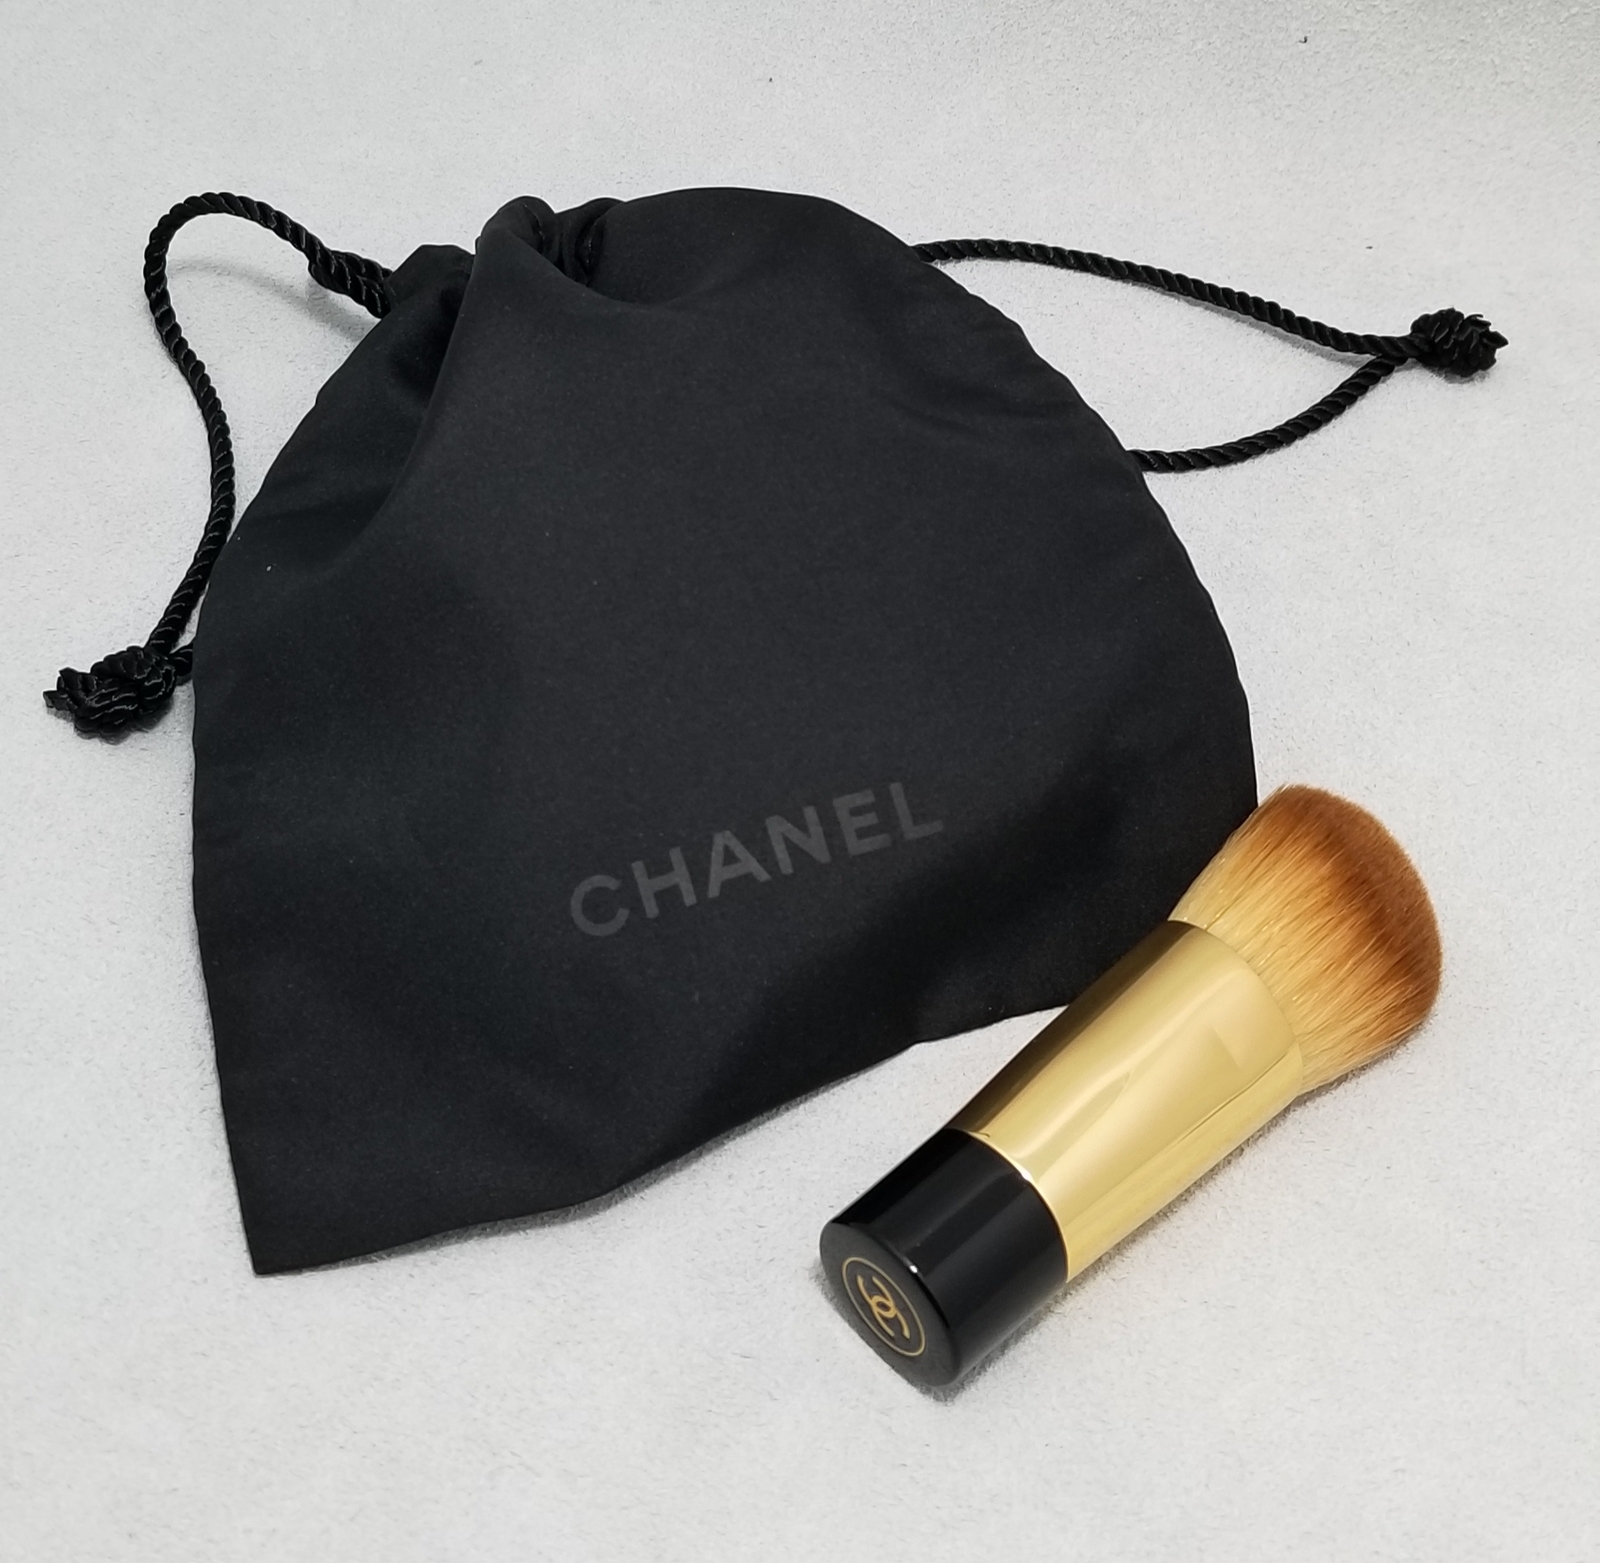 CHANEL MAKEUP BRUSH & SMALL DRAWSTRING POUCH. NEW